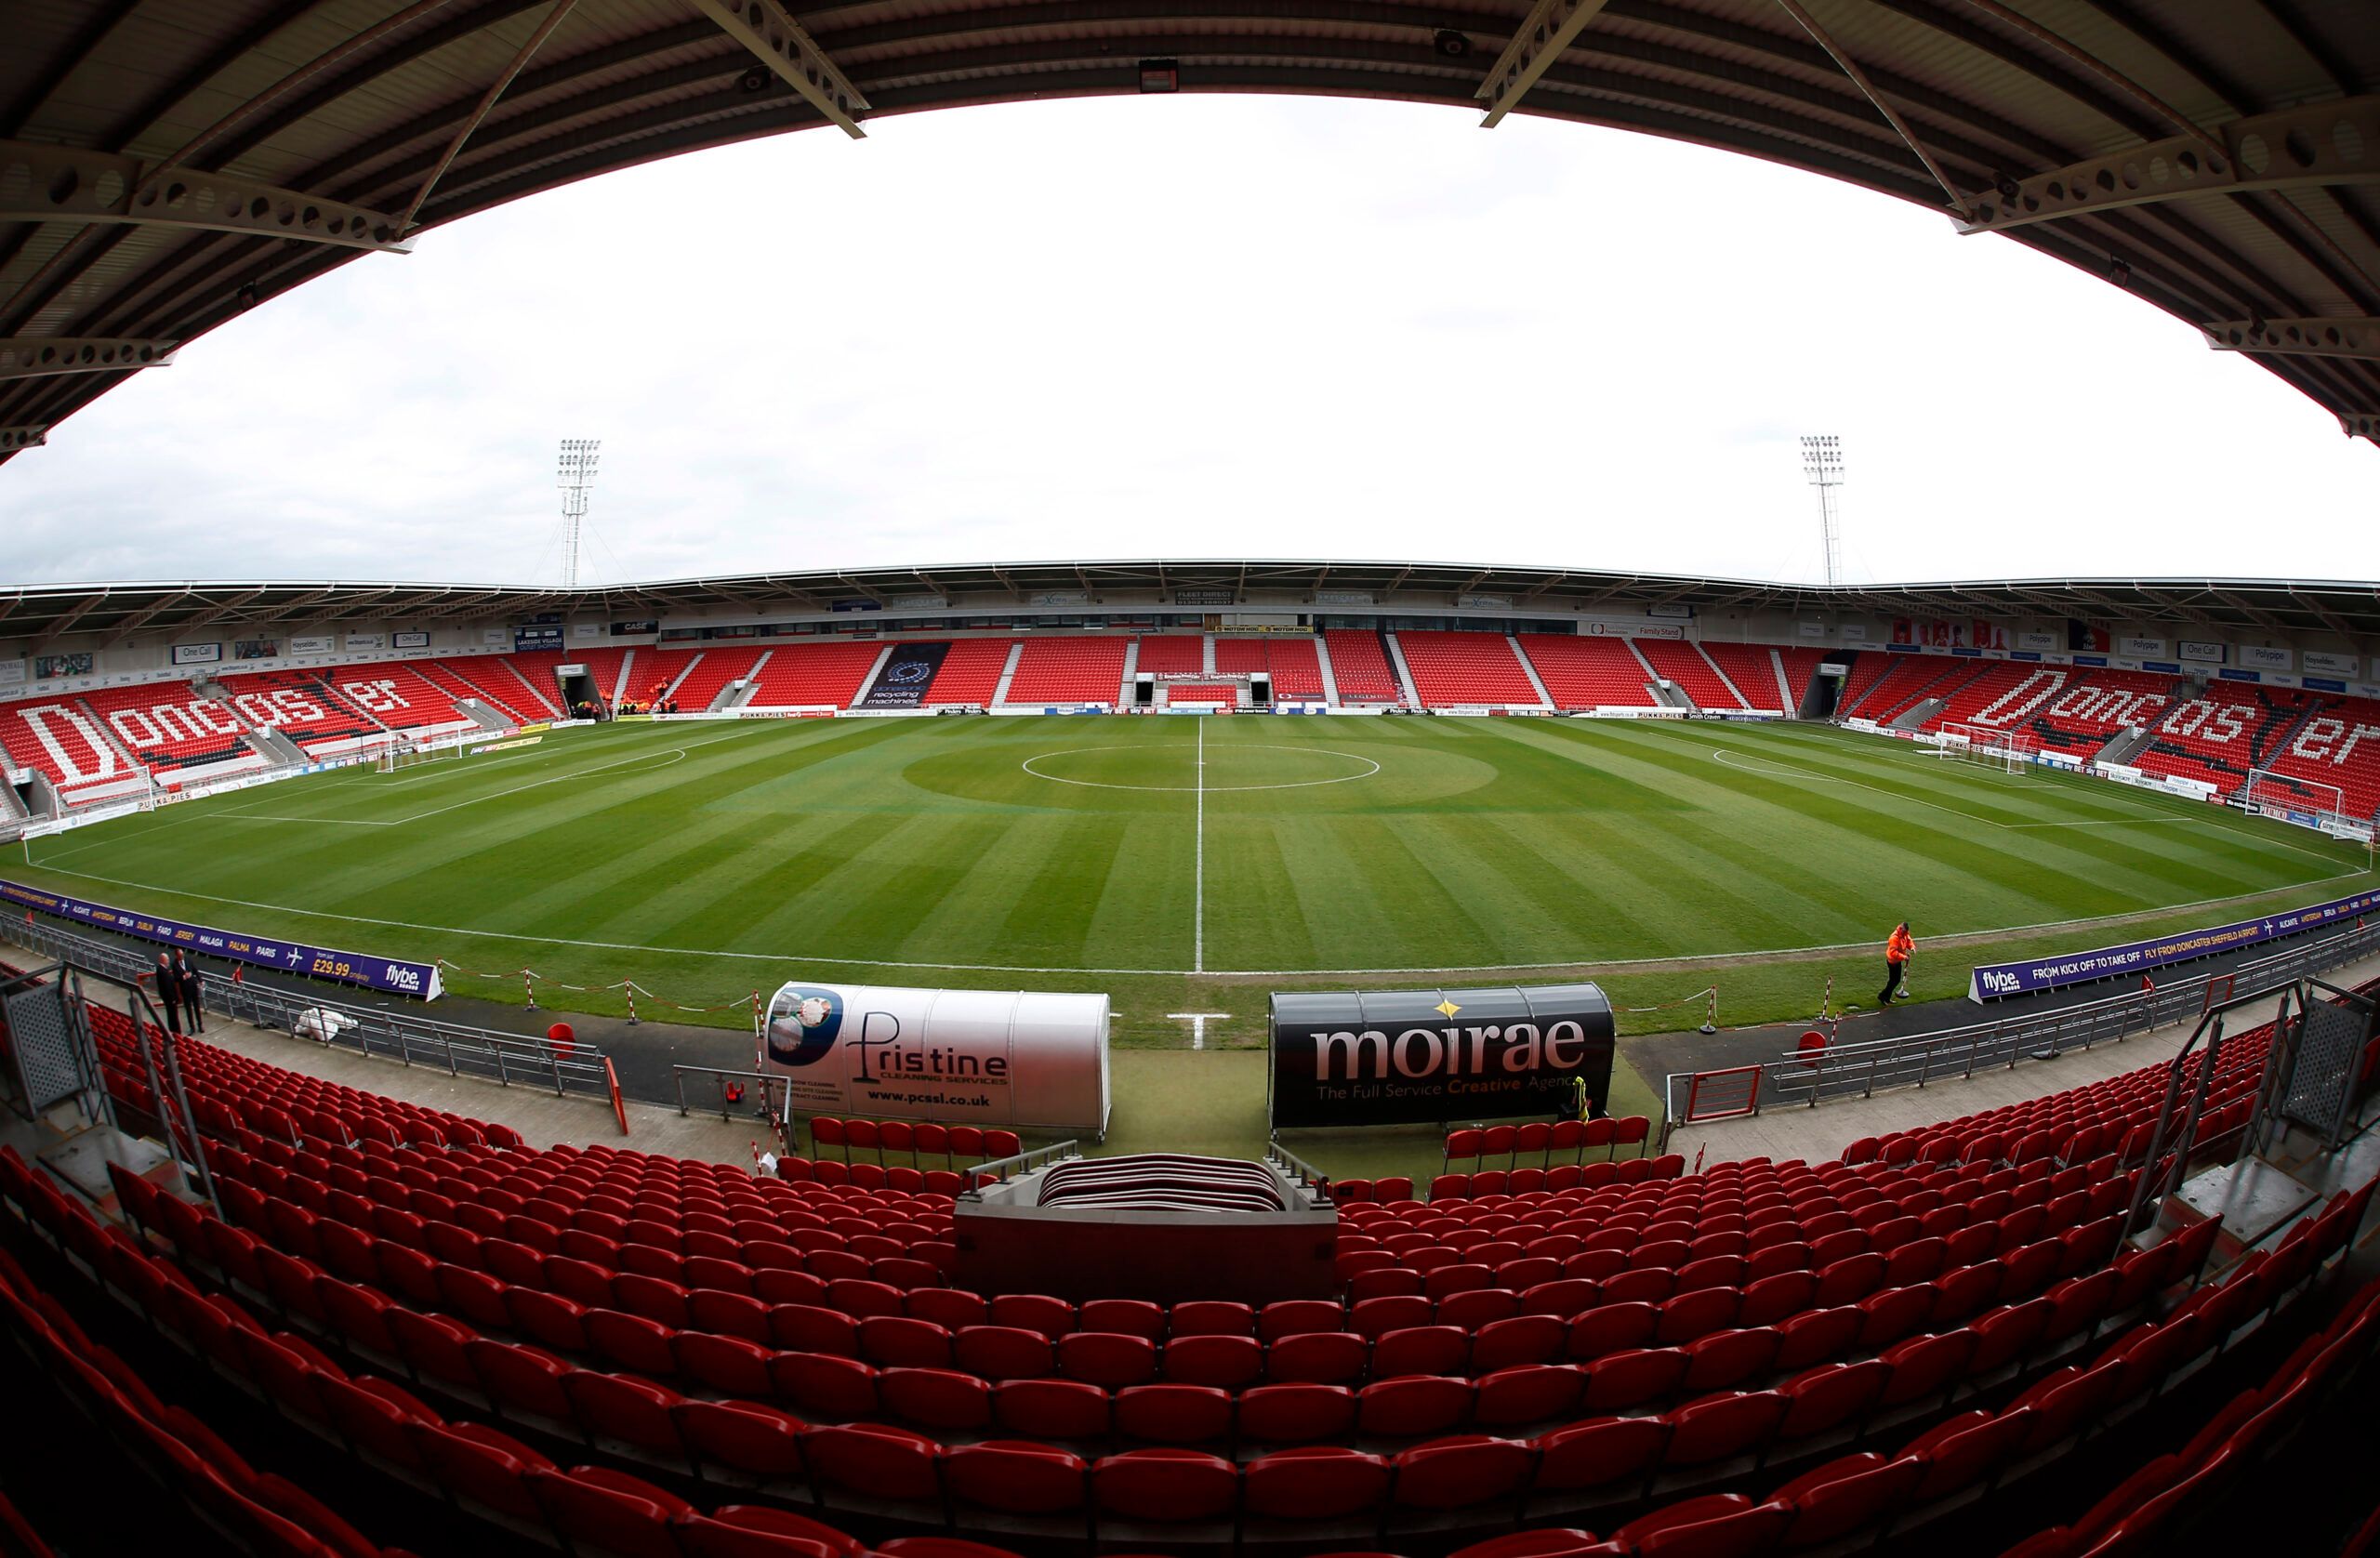 Britain Football Soccer - Doncaster Rovers v Exeter City - Sky Bet League Two - The Keepmoat Stadium - 29/4/17 General view inside the stadium before the match  Mandatory Credit: Action Images / Craig Brough Livepic EDITORIAL USE ONLY. No use with unauthorized audio, video, data, fixture lists, club/league logos or 